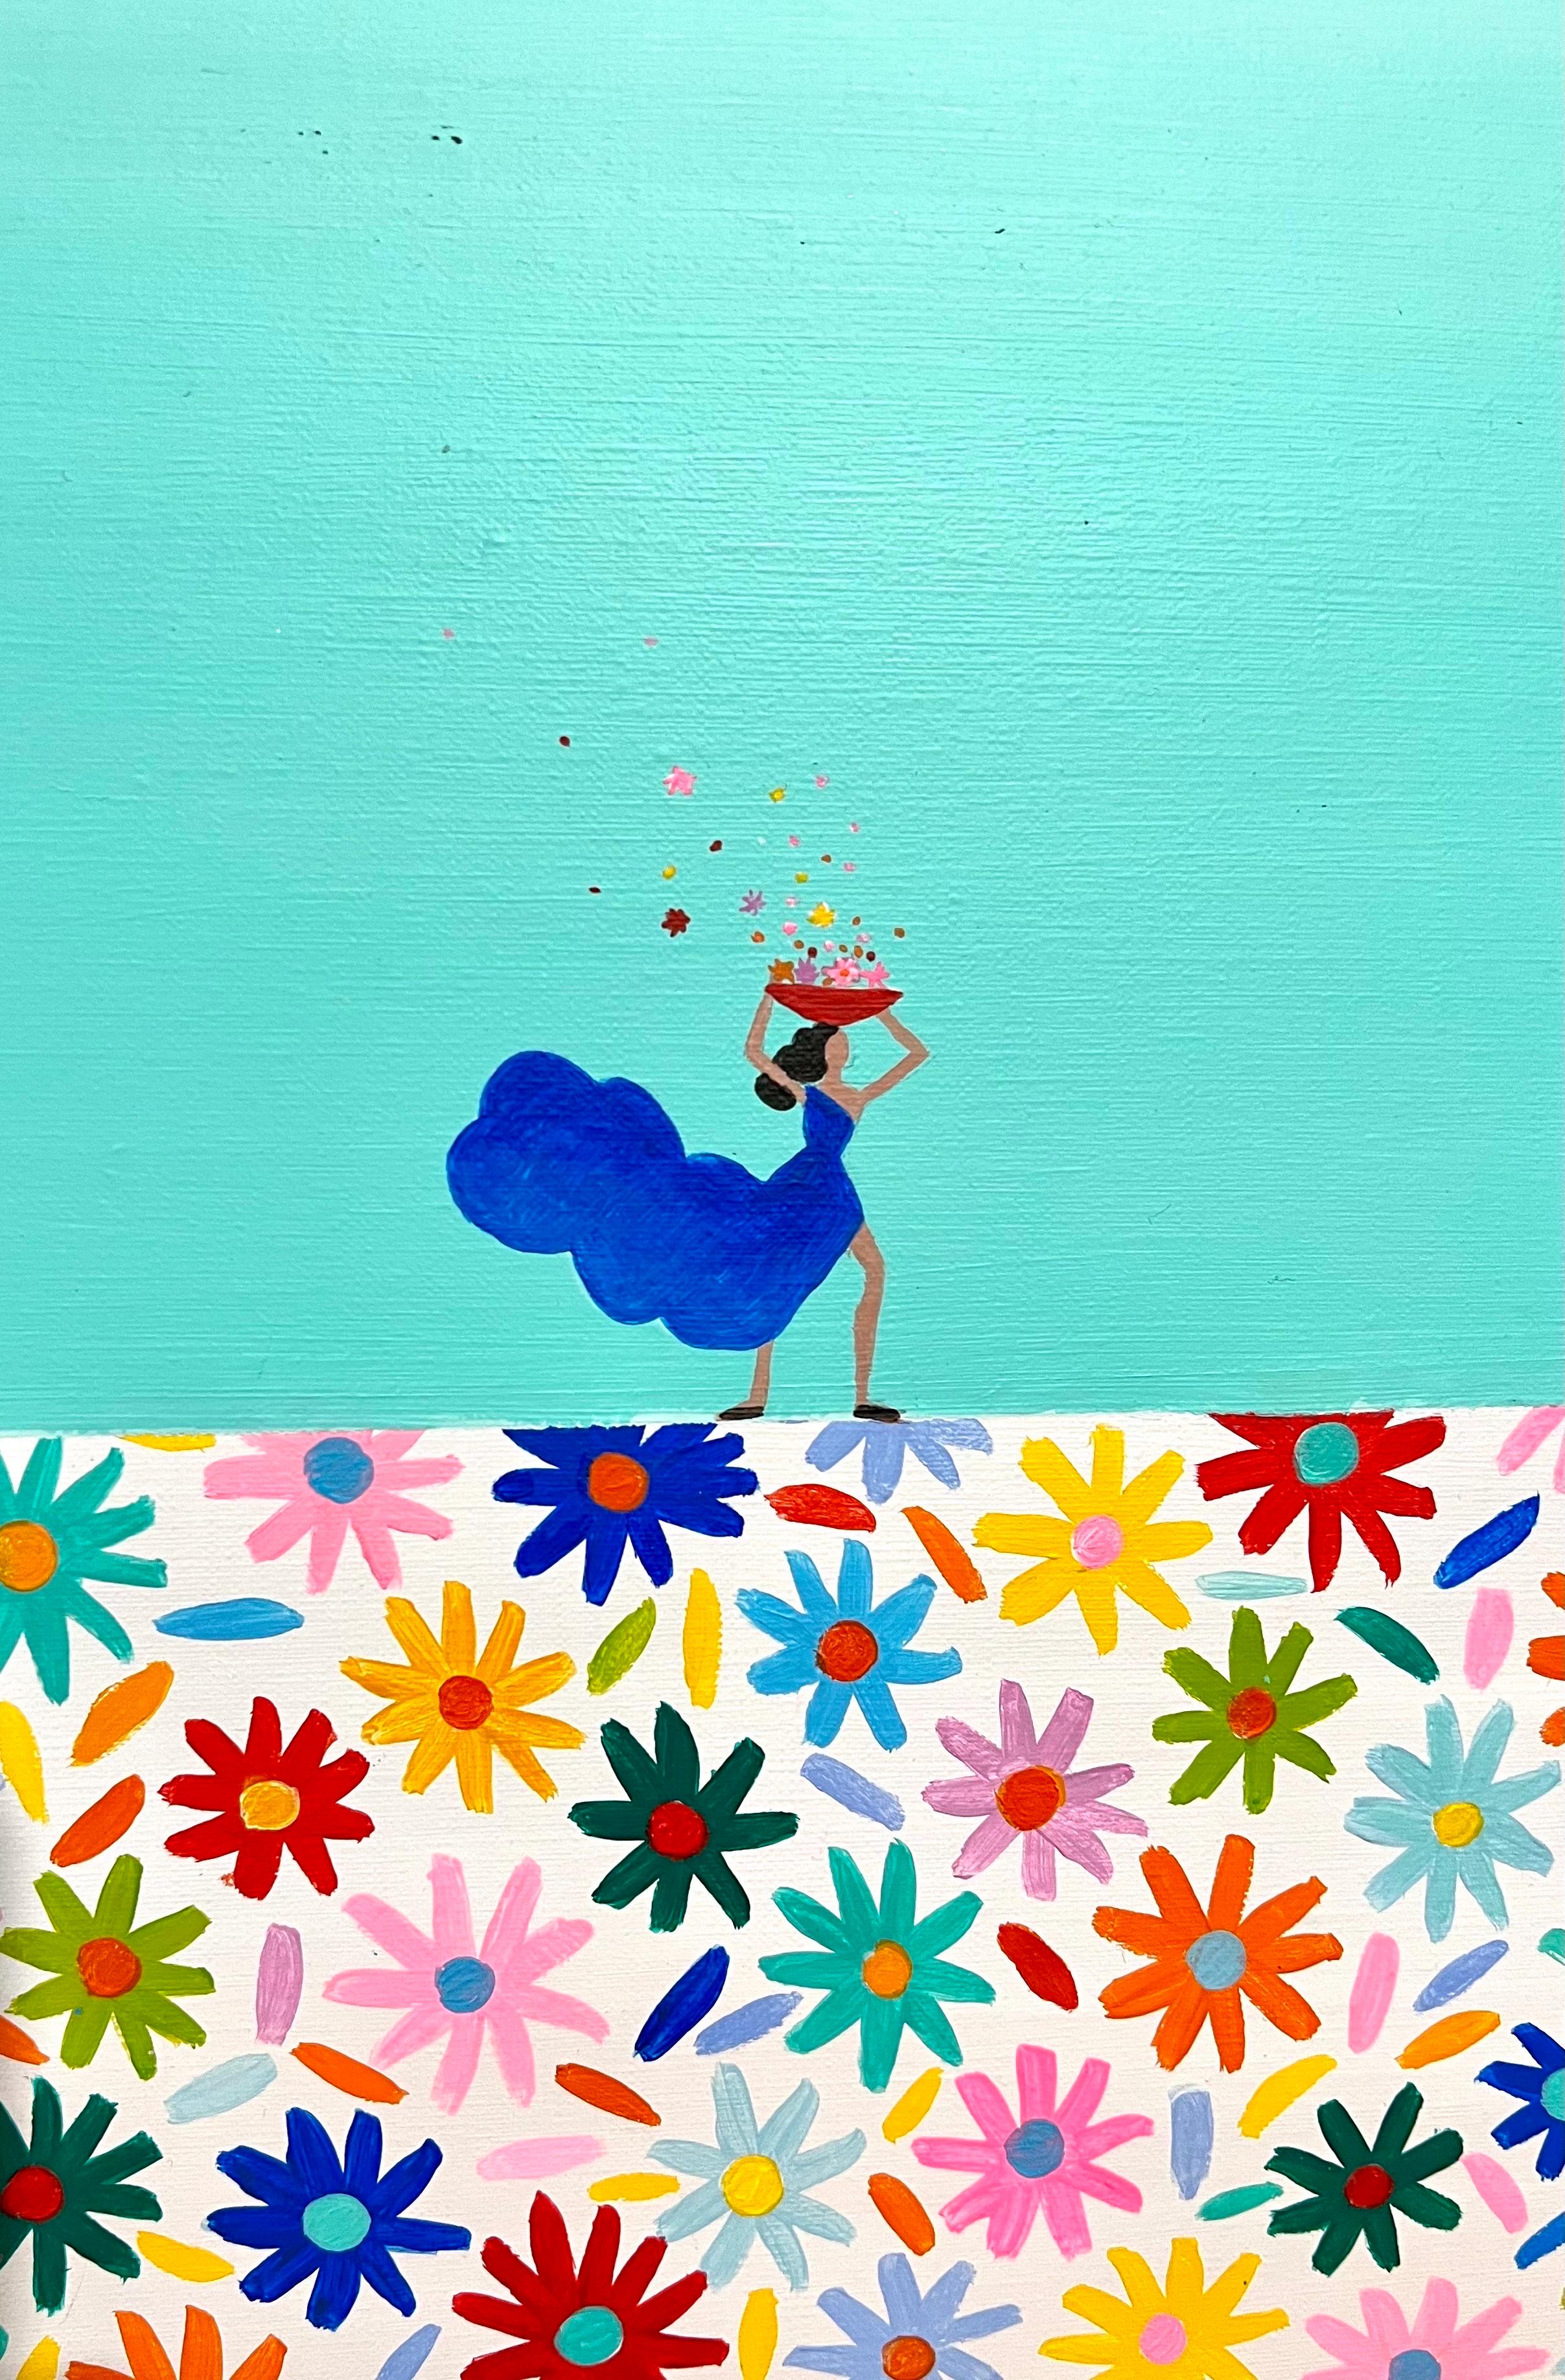 
A woman picking flowers in a flower field with a blowing, flowing dress against an ombre sky.
Hand signed and dated verso. Bears a Barcelona, Spain stamp on the stretcher.
32 X 32 inches

Persian Canadian artist Shirin Sahba was born in India, With